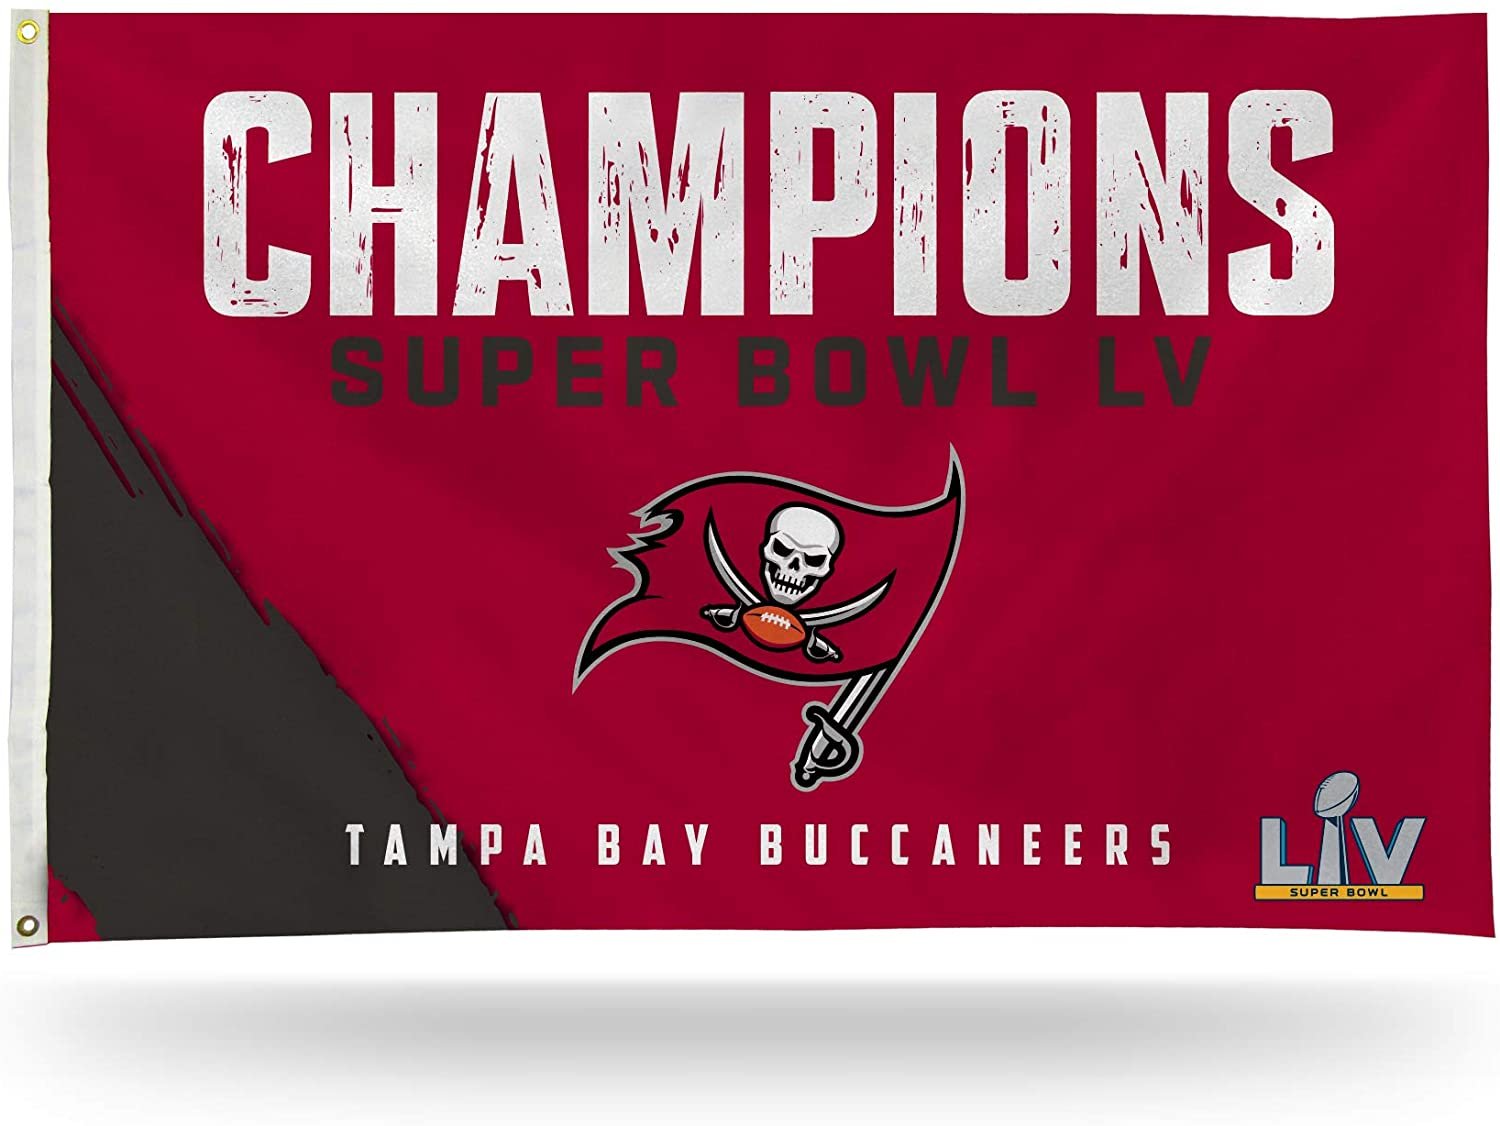 Tampa Bay Buccaneers Super Bowl LV Champions Premium 3x5 Feet Flag Banner, Metal Grommets, Outdoor Use, Single Sided